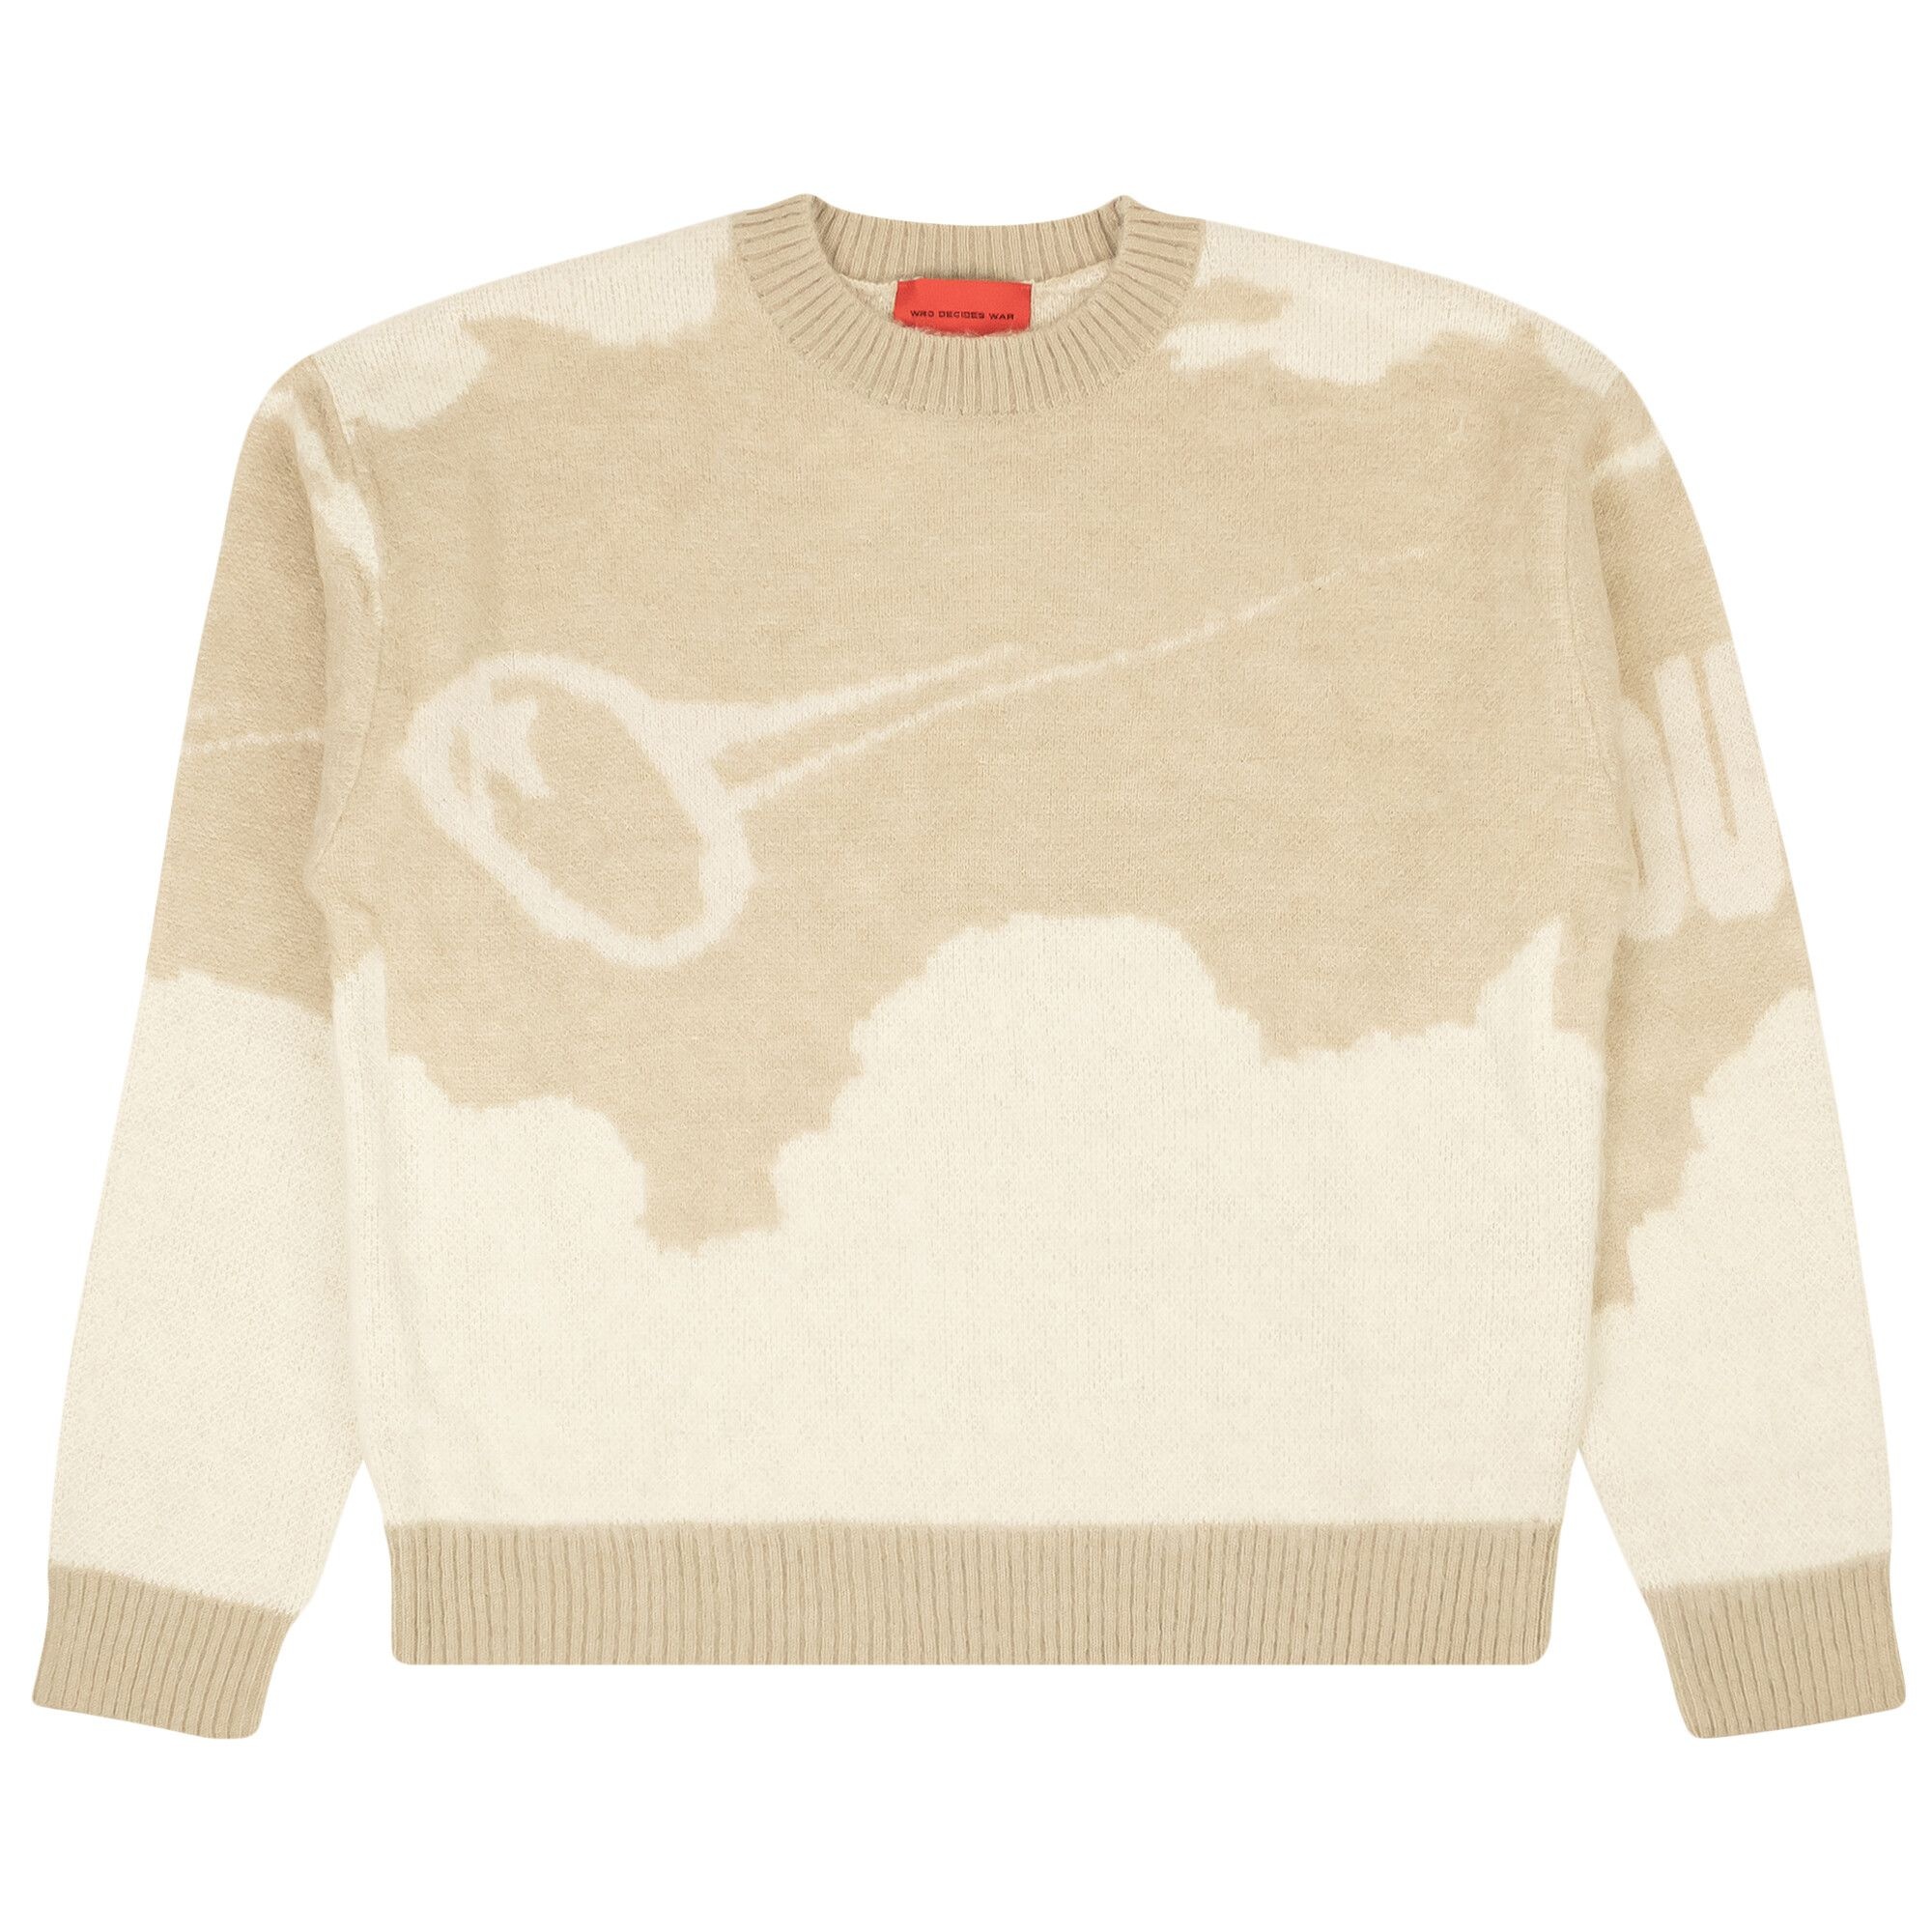 Who Decides War Are You Ready Crewneck Sweater 'Beige' - 1